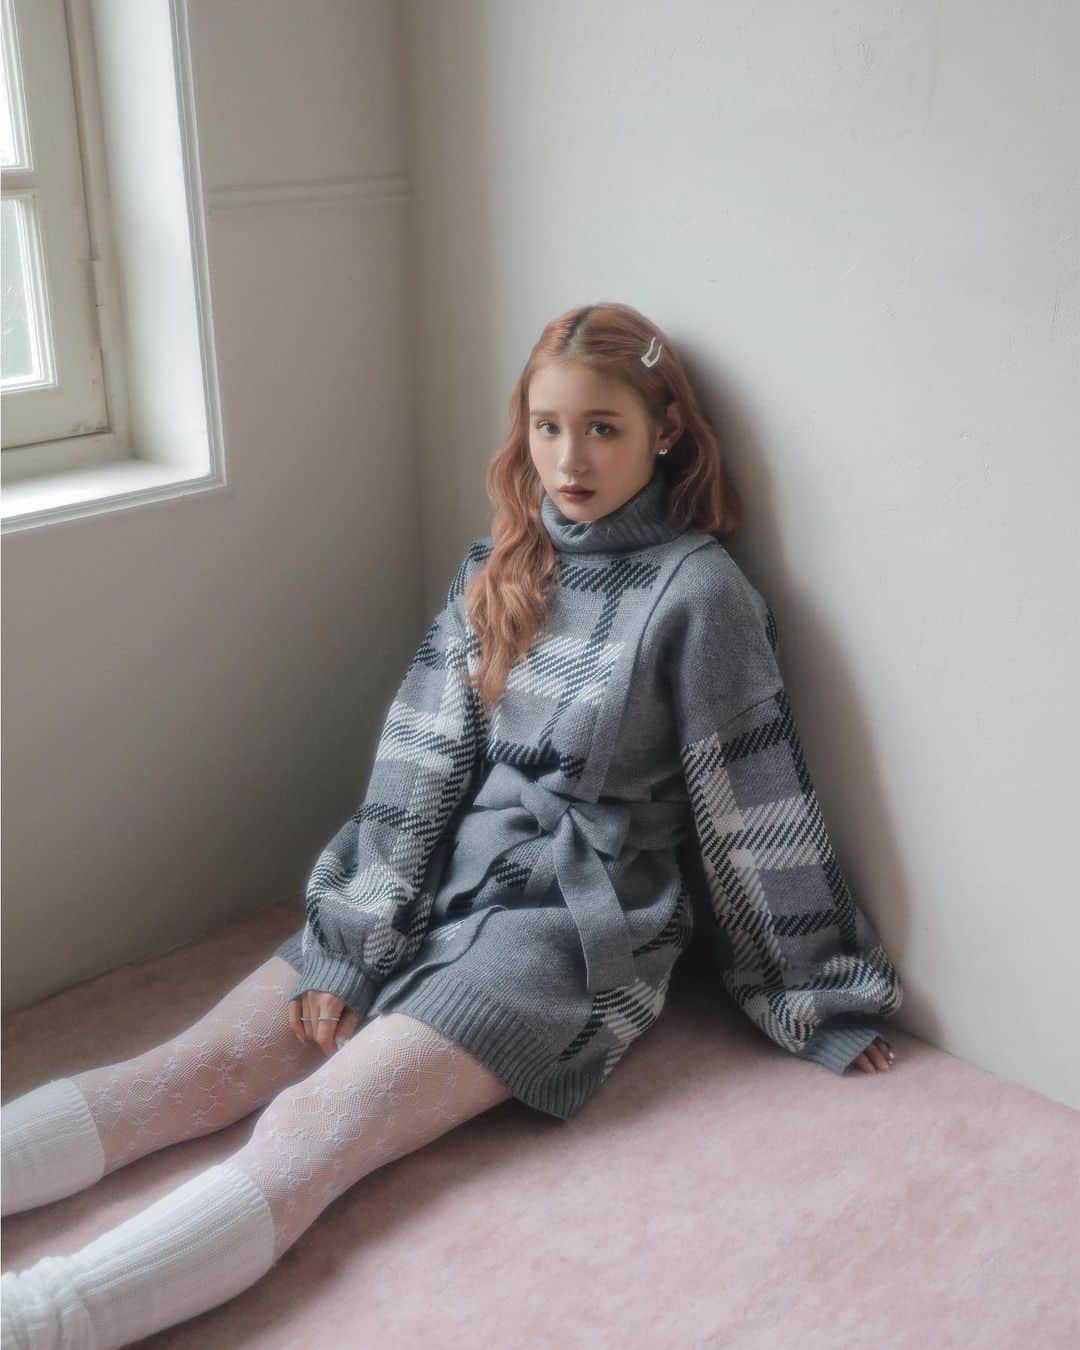 BUBBLESのインスタグラム：「ㅤㅤㅤㅤㅤㅤㅤㅤㅤㅤㅤㅤㅤ ㅤㅤㅤㅤㅤㅤㅤㅤㅤㅤㅤㅤㅤ BUBBLES Autumn / October,2023  REVIVAL ☑︎ loosn knit one-piece ¥9,500+tax color :  gray / black / blue / pink https://www.sparklingmall.jp/c/sparklingmall_all/BS71308 ㅤㅤㅤㅤㅤㅤㅤㅤㅤㅤㅤ _____________________________________________  #bubbles #bubblestokyo  #bubbles_shibuya #bubbles_shinjuku #bubblessawthecity #bubbles #new #clothing #fashion #style #styleinspo #girly #classicalgirly #brushgirly #harajuku #shibuya #newarrival #october #aw #autumn #fall #2023_BUBBLES #October2023_BUBBLES」